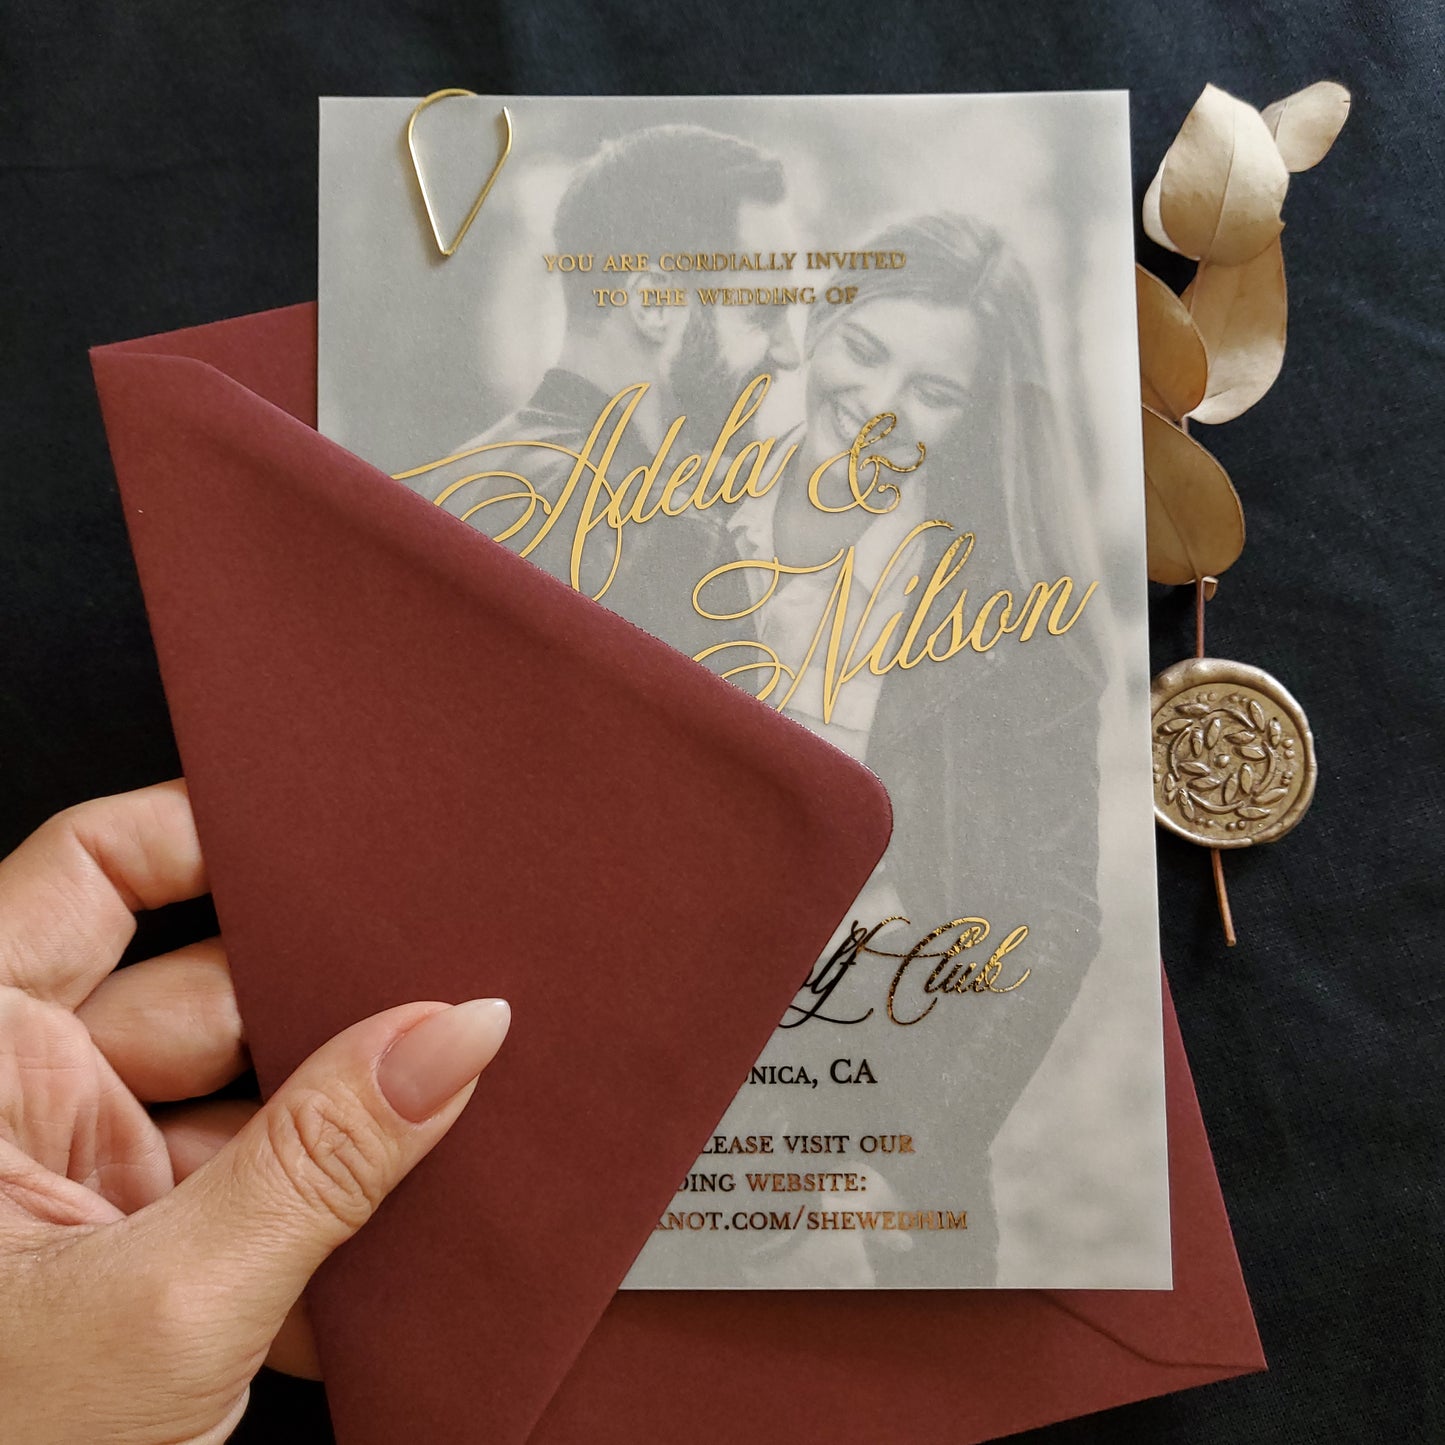 vellum wedding invitations with picture and gold foiled text  - XOXOKristen